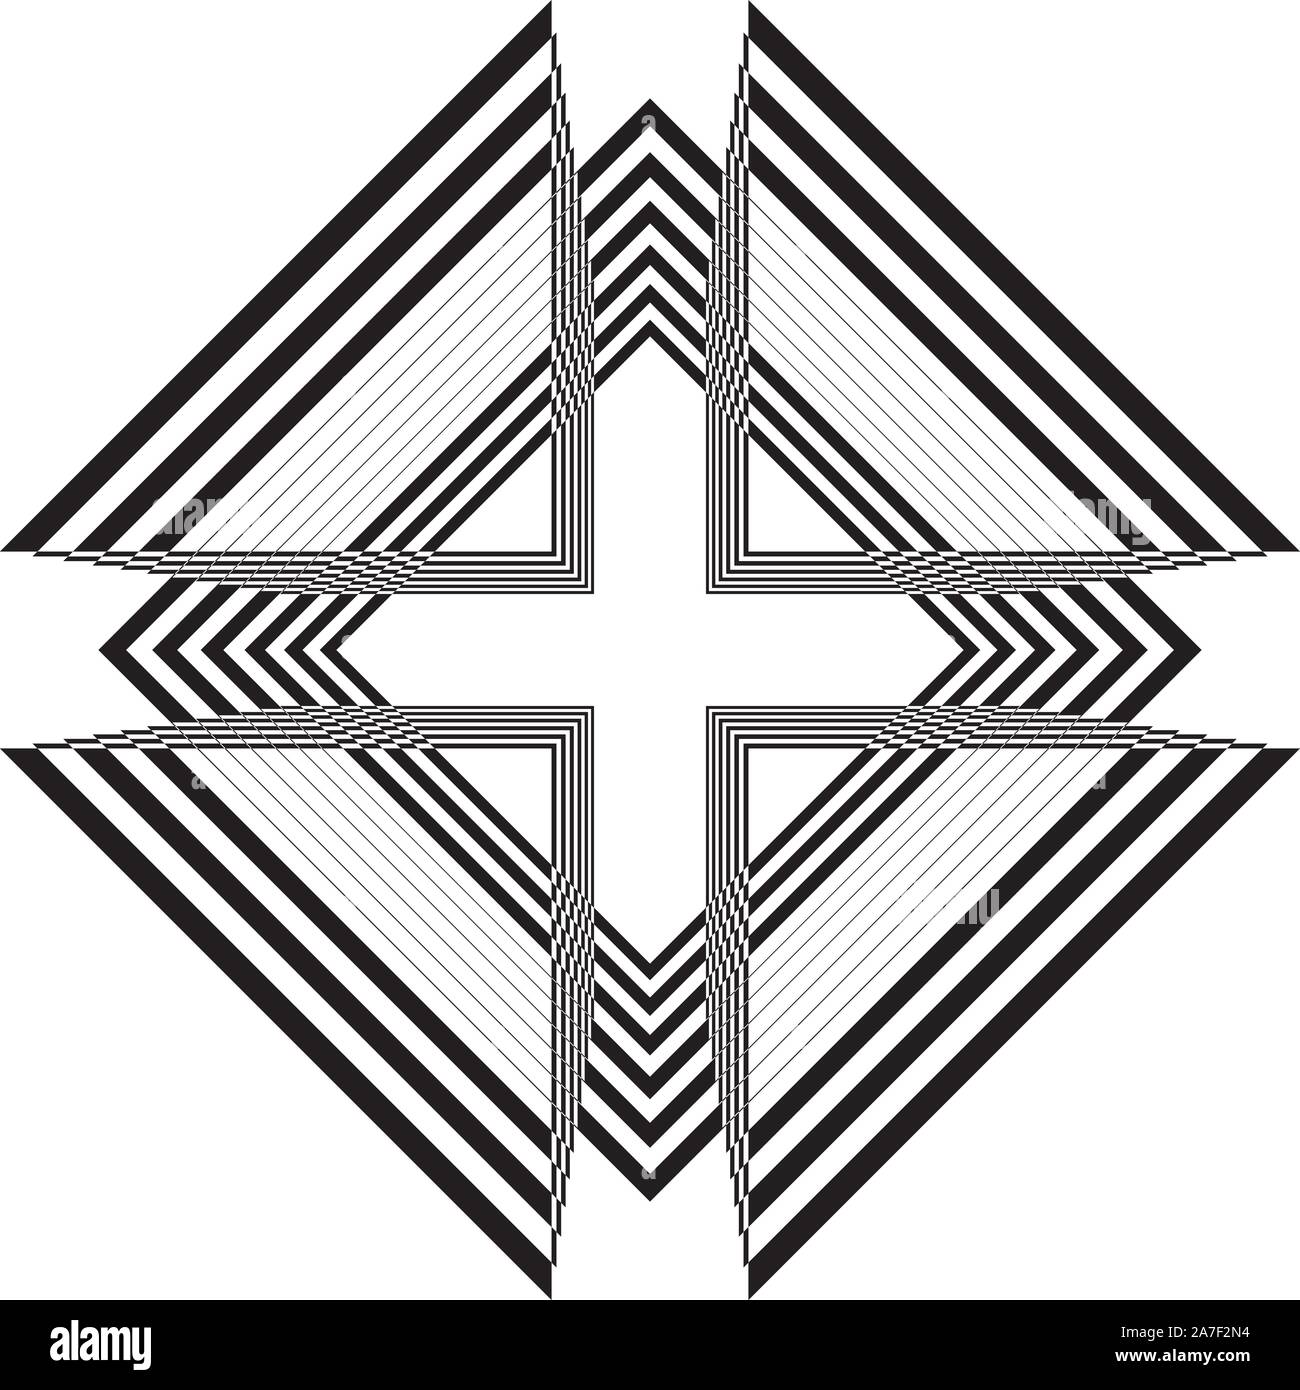 abstract arabesque church ceiling black on transparent background ...